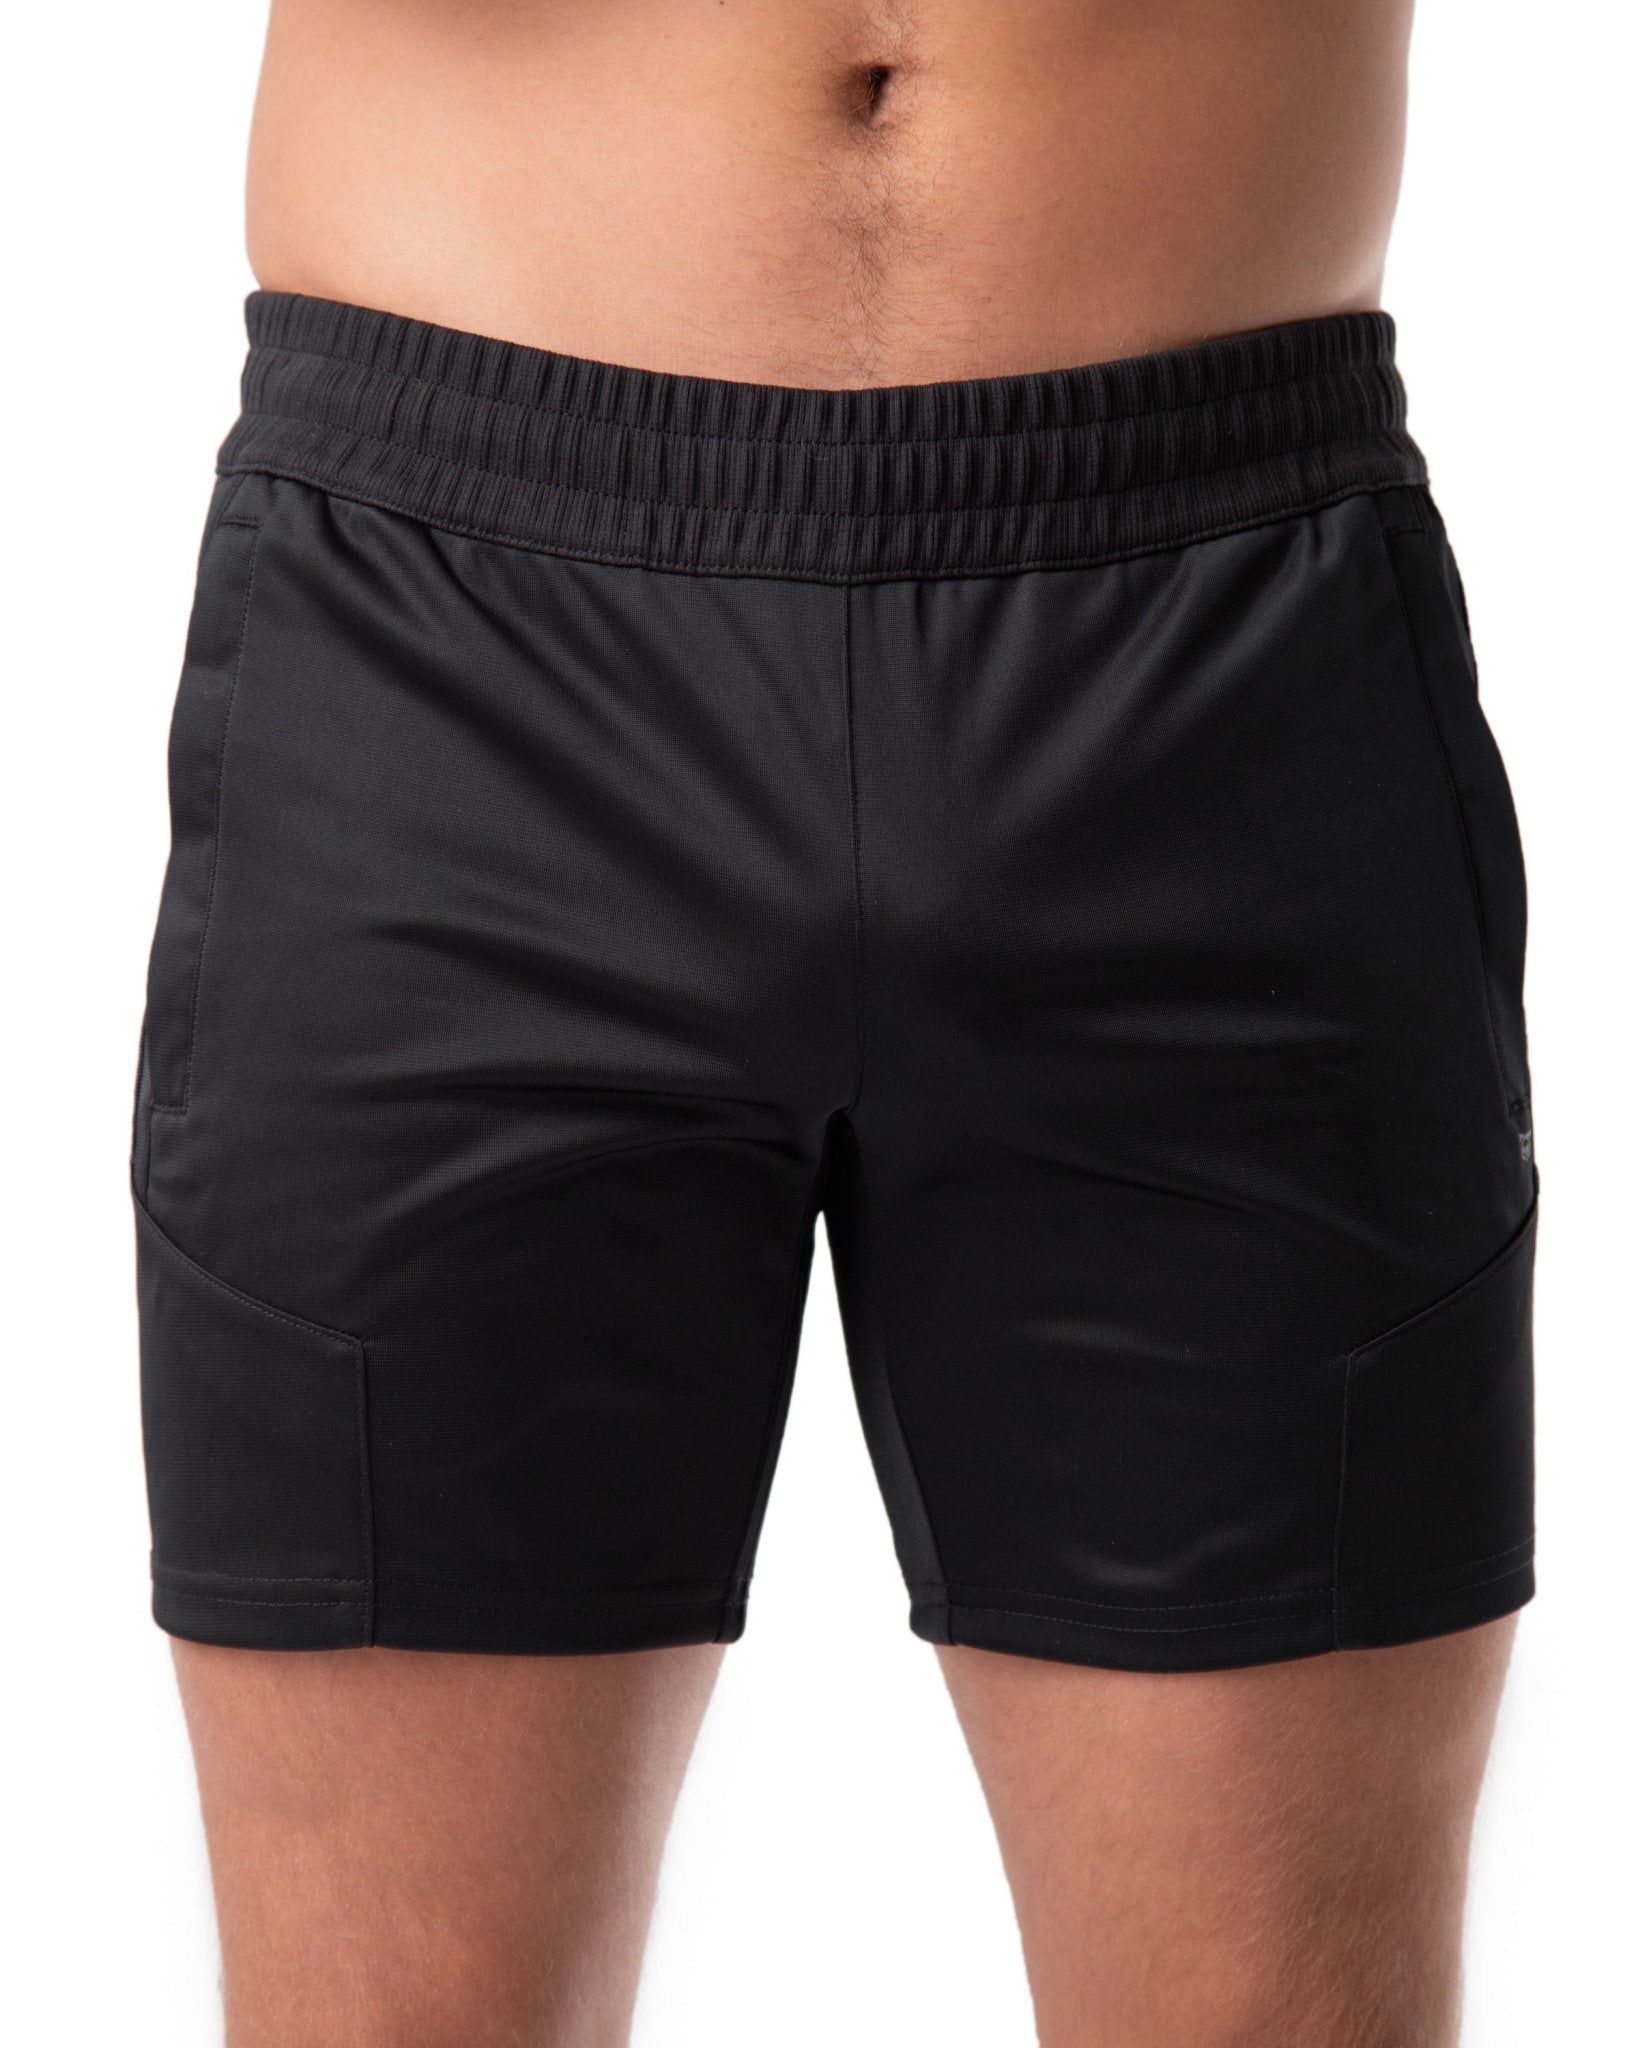 Shadow Rugby Short - Nasty Pig